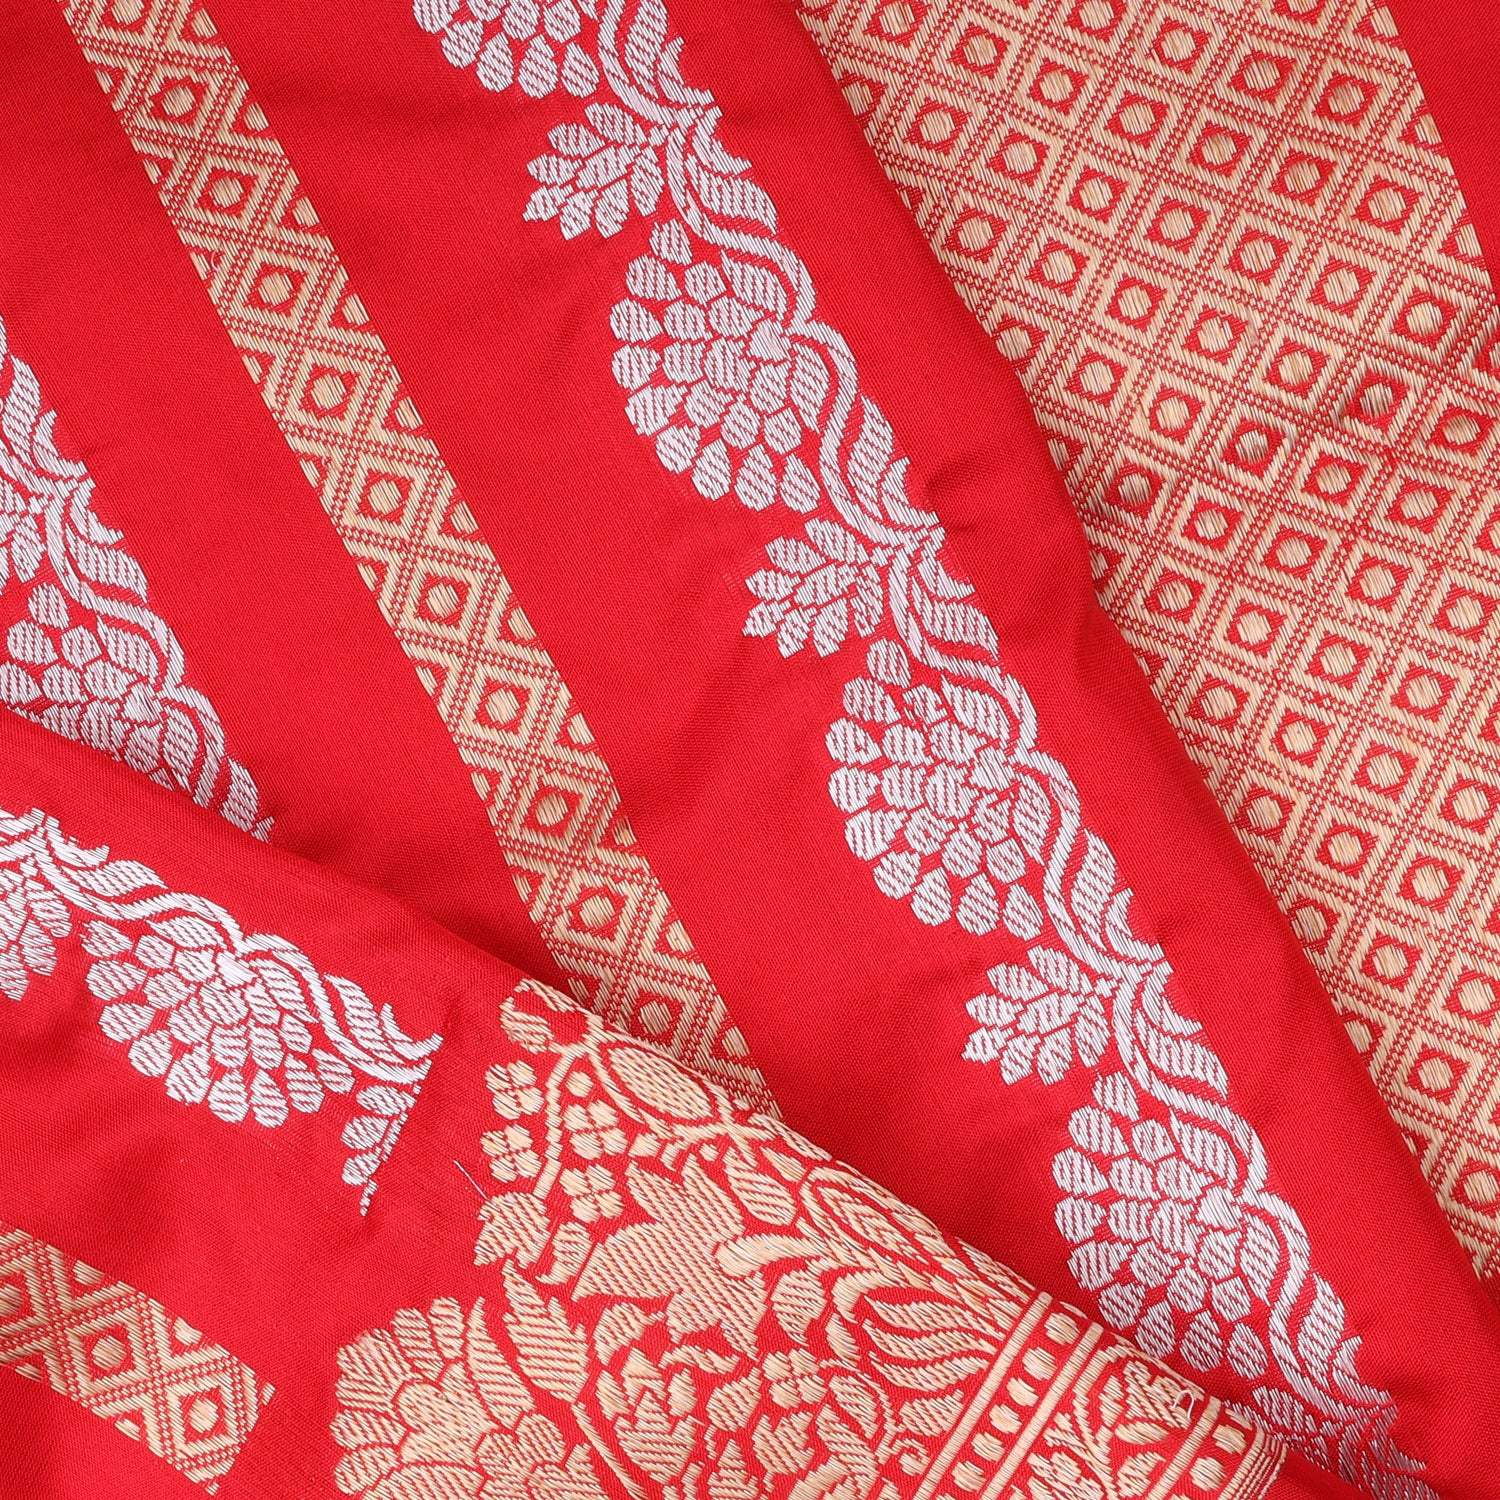 Vibrant Red Banarasi Silk Saree With Floral Stripes Pattern - Singhania's